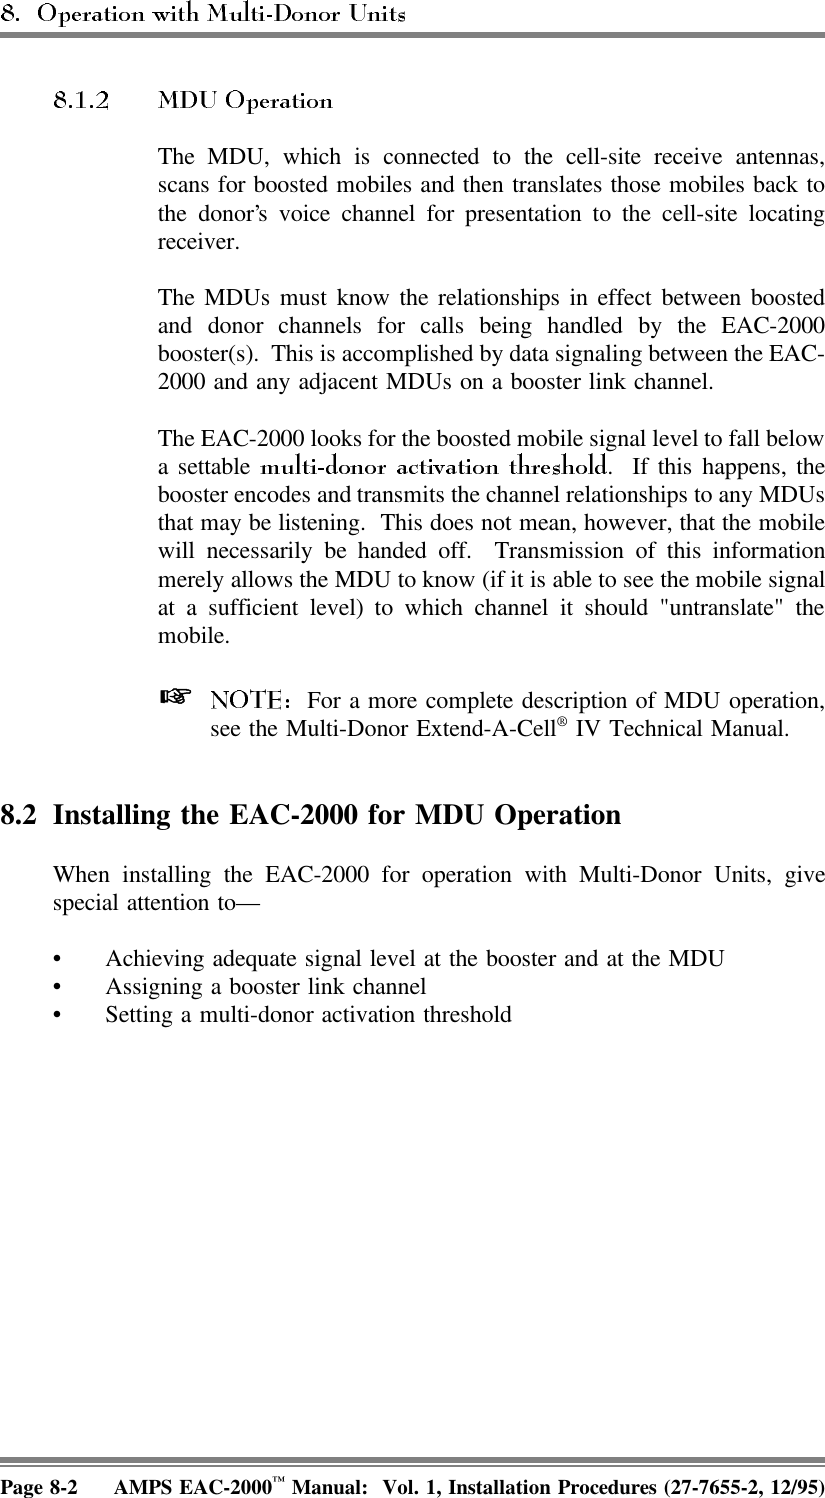 The MDU, which is connected to the cell-site receive antennas,scans for boosted mobiles and then translates those mobiles back tothe donor’s voice channel for presentation to the cell-site locatingreceiver.The MDUs must know the relationships in effect between boostedand donor channels for calls being handled by the EAC-2000booster(s).  This is accomplished by data signaling between the EAC-2000 and any adjacent MDUs on a booster link channel. The EAC-2000 looks for the boosted mobile signal level to fall belowa settable  .  If this happens, thebooster encodes and transmits the channel relationships to any MDUsthat may be listening.  This does not mean, however, that the mobilewill necessarily be handed off.  Transmission of this informationmerely allows the MDU to know (if it is able to see the mobile signalat a sufficient level) to which channel it should &quot;untranslate&quot; themobile.   For a more complete description of MDU operation,see the Multi-Donor Extend-A-Cell® IV Technical Manual.8.2 Installing the EAC-2000 for MDU Operation When installing the EAC-2000 for operation with Multi-Donor Units, givespecial attention to— • Achieving adequate signal level at the booster and at the MDU • Assigning a booster link channel• Setting a multi-donor activation thresholdPage 8-2 AMPS EAC-2000™ Manual:  Vol. 1, Installation Procedures (27-7655-2, 12/95)